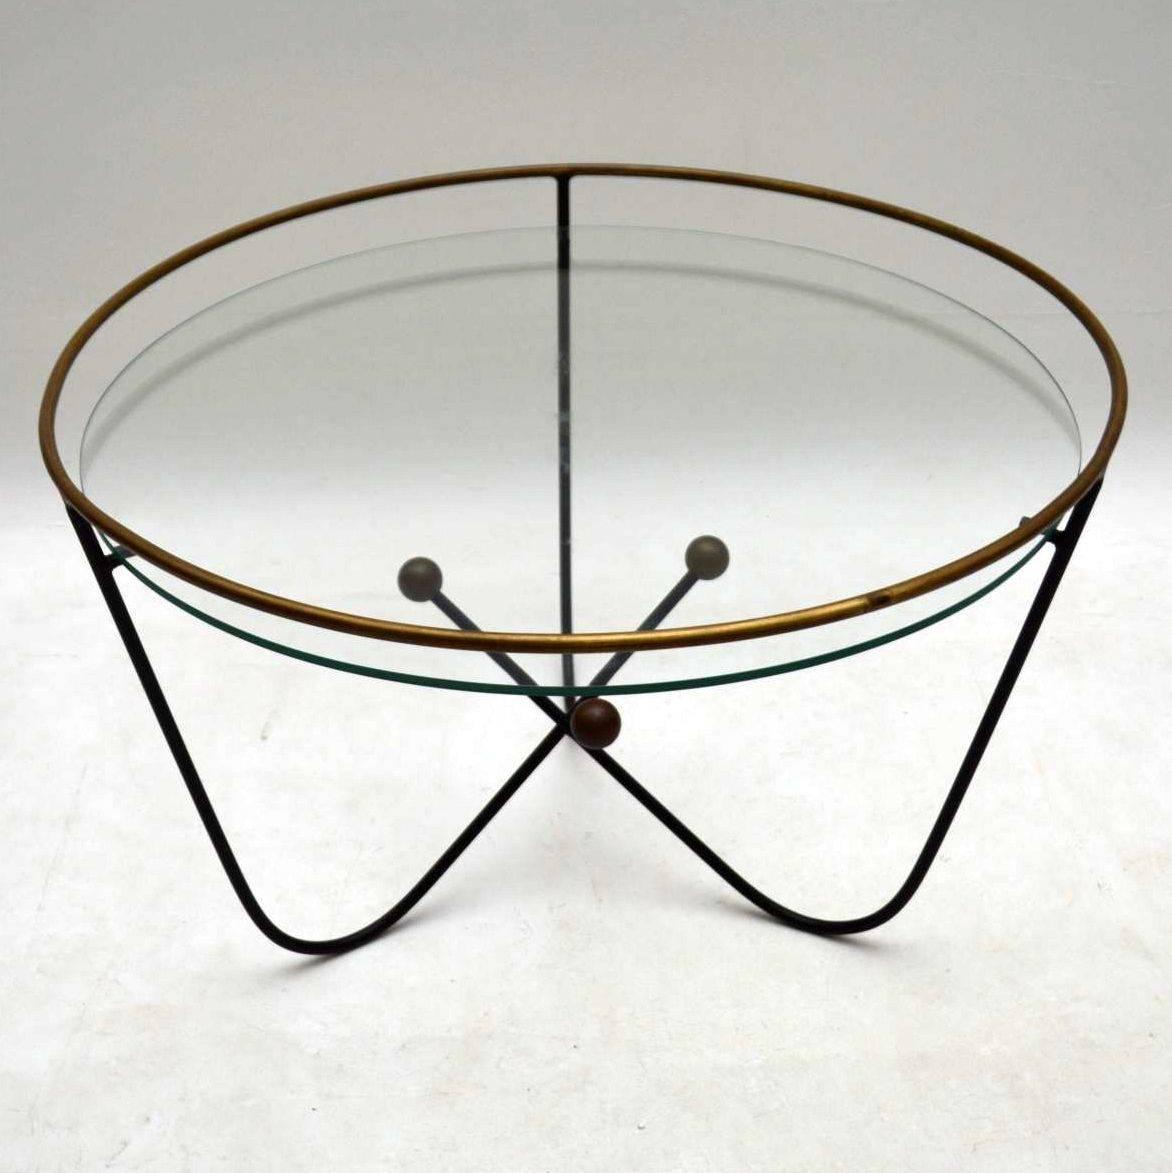 This stylish atomic style vintage coffee table was designed by Edward Ihnatowicz and was manufactured by Mars furniture in the 1950s. It has a black steel frame with a brass rim and three circular brass fixtures on the base. The frame has some